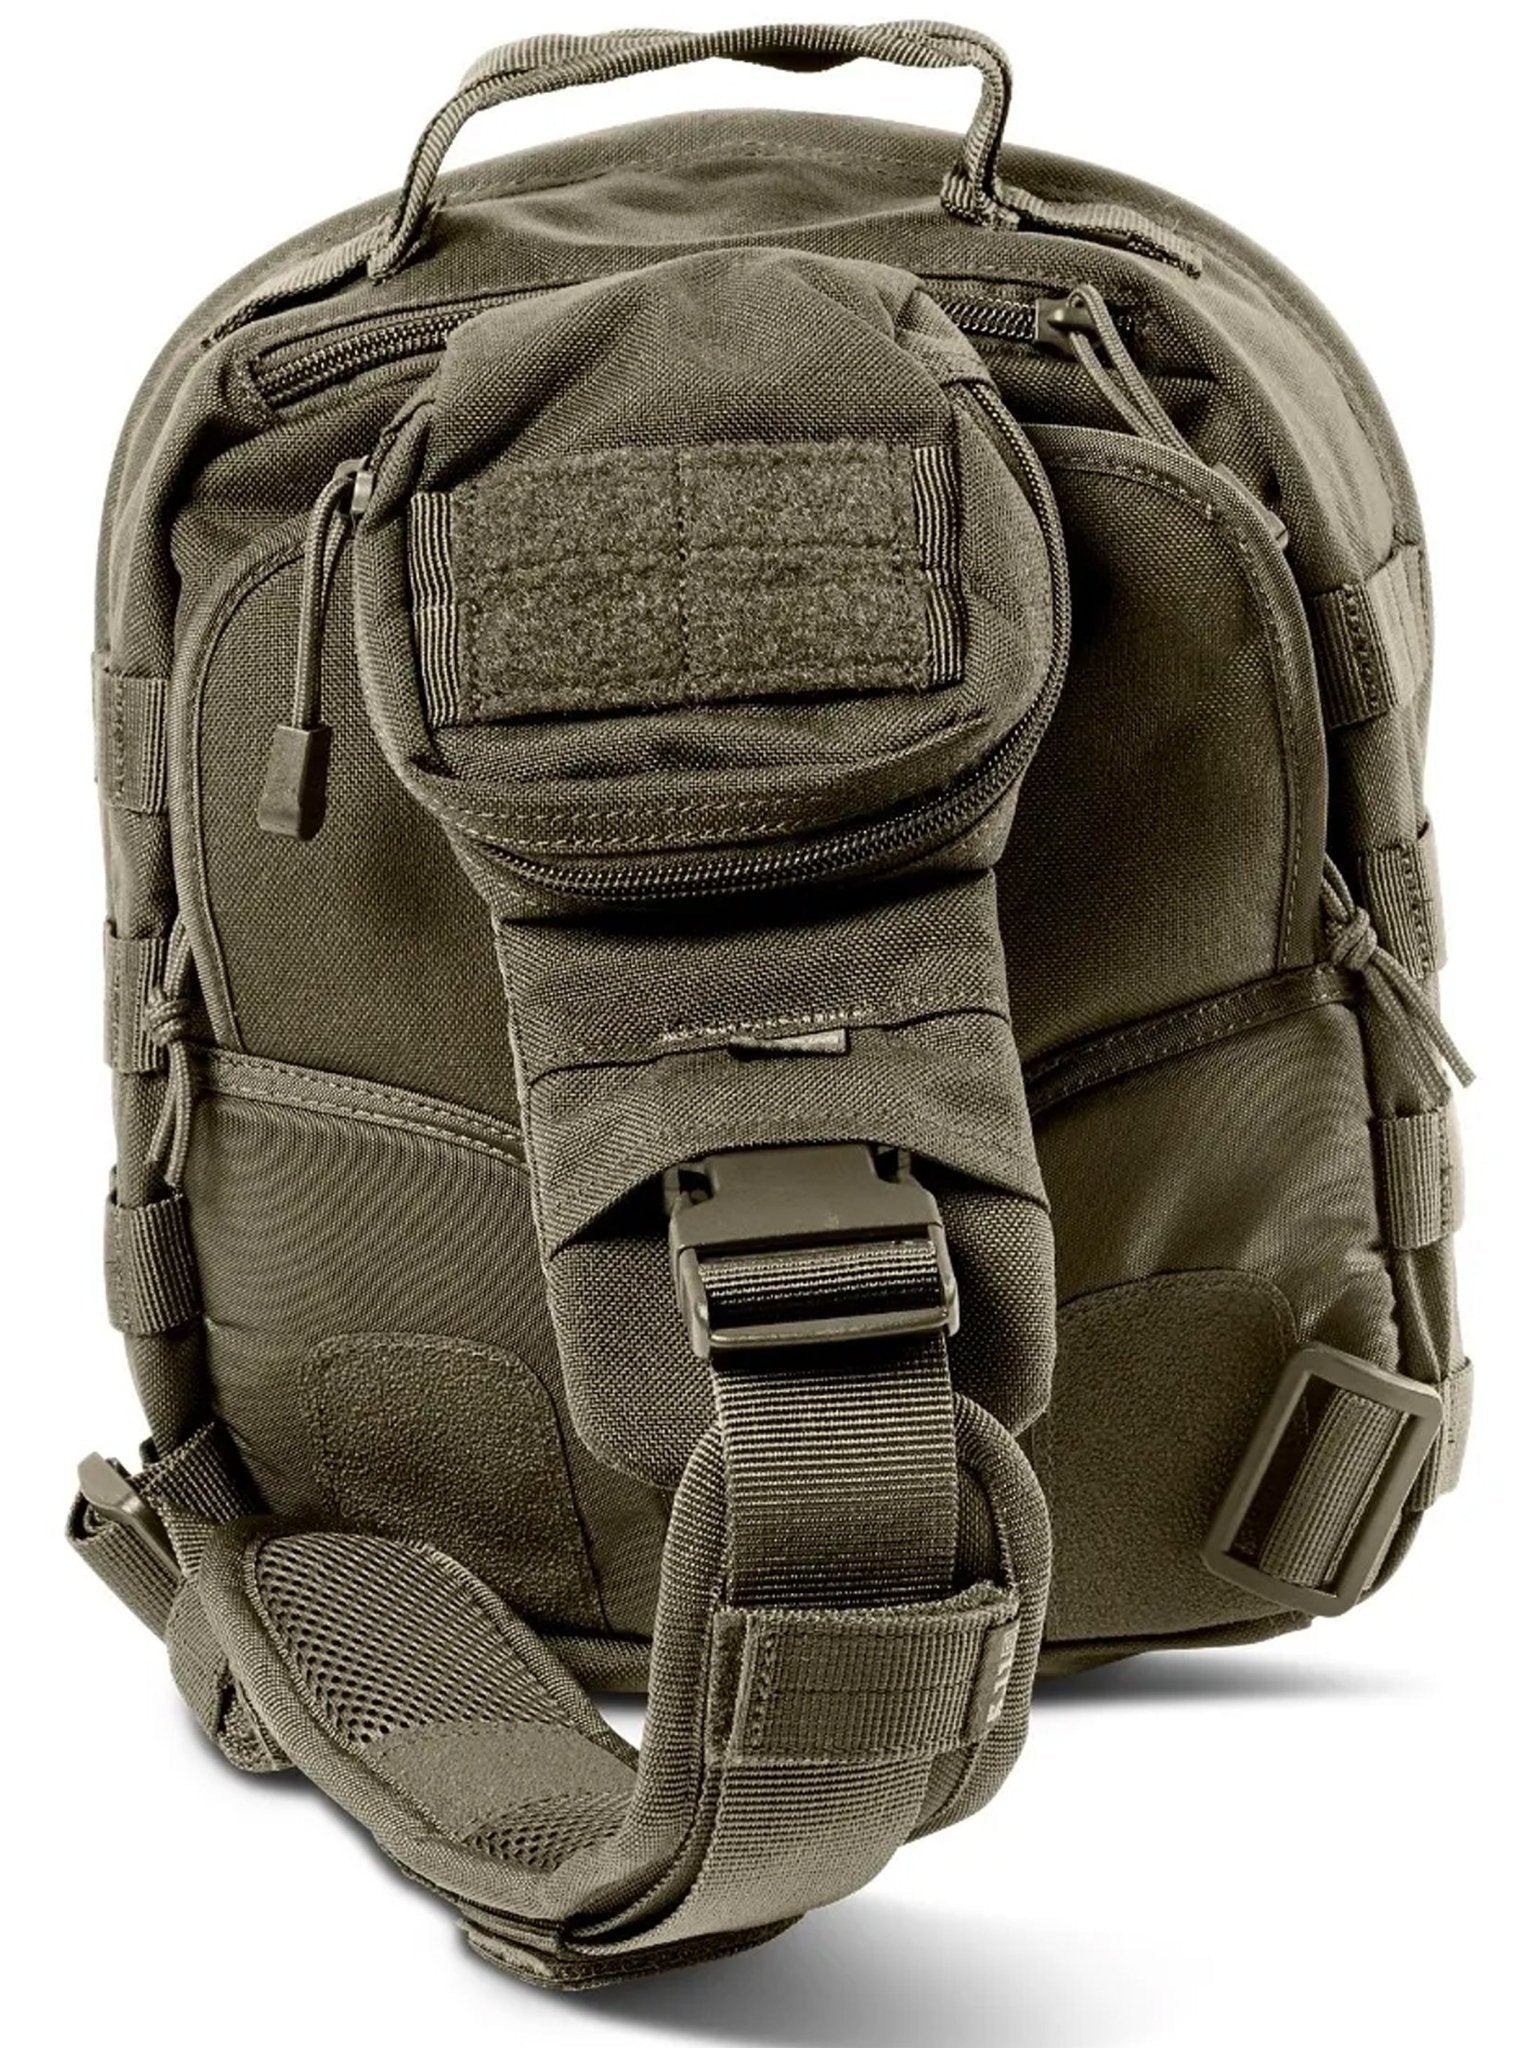 4elementsclothing5.11 Tactical5.11 Tactical - 5.11 Tactical MOAB™ 6 SLING PACK 11L - Style 56963Bag56963-026